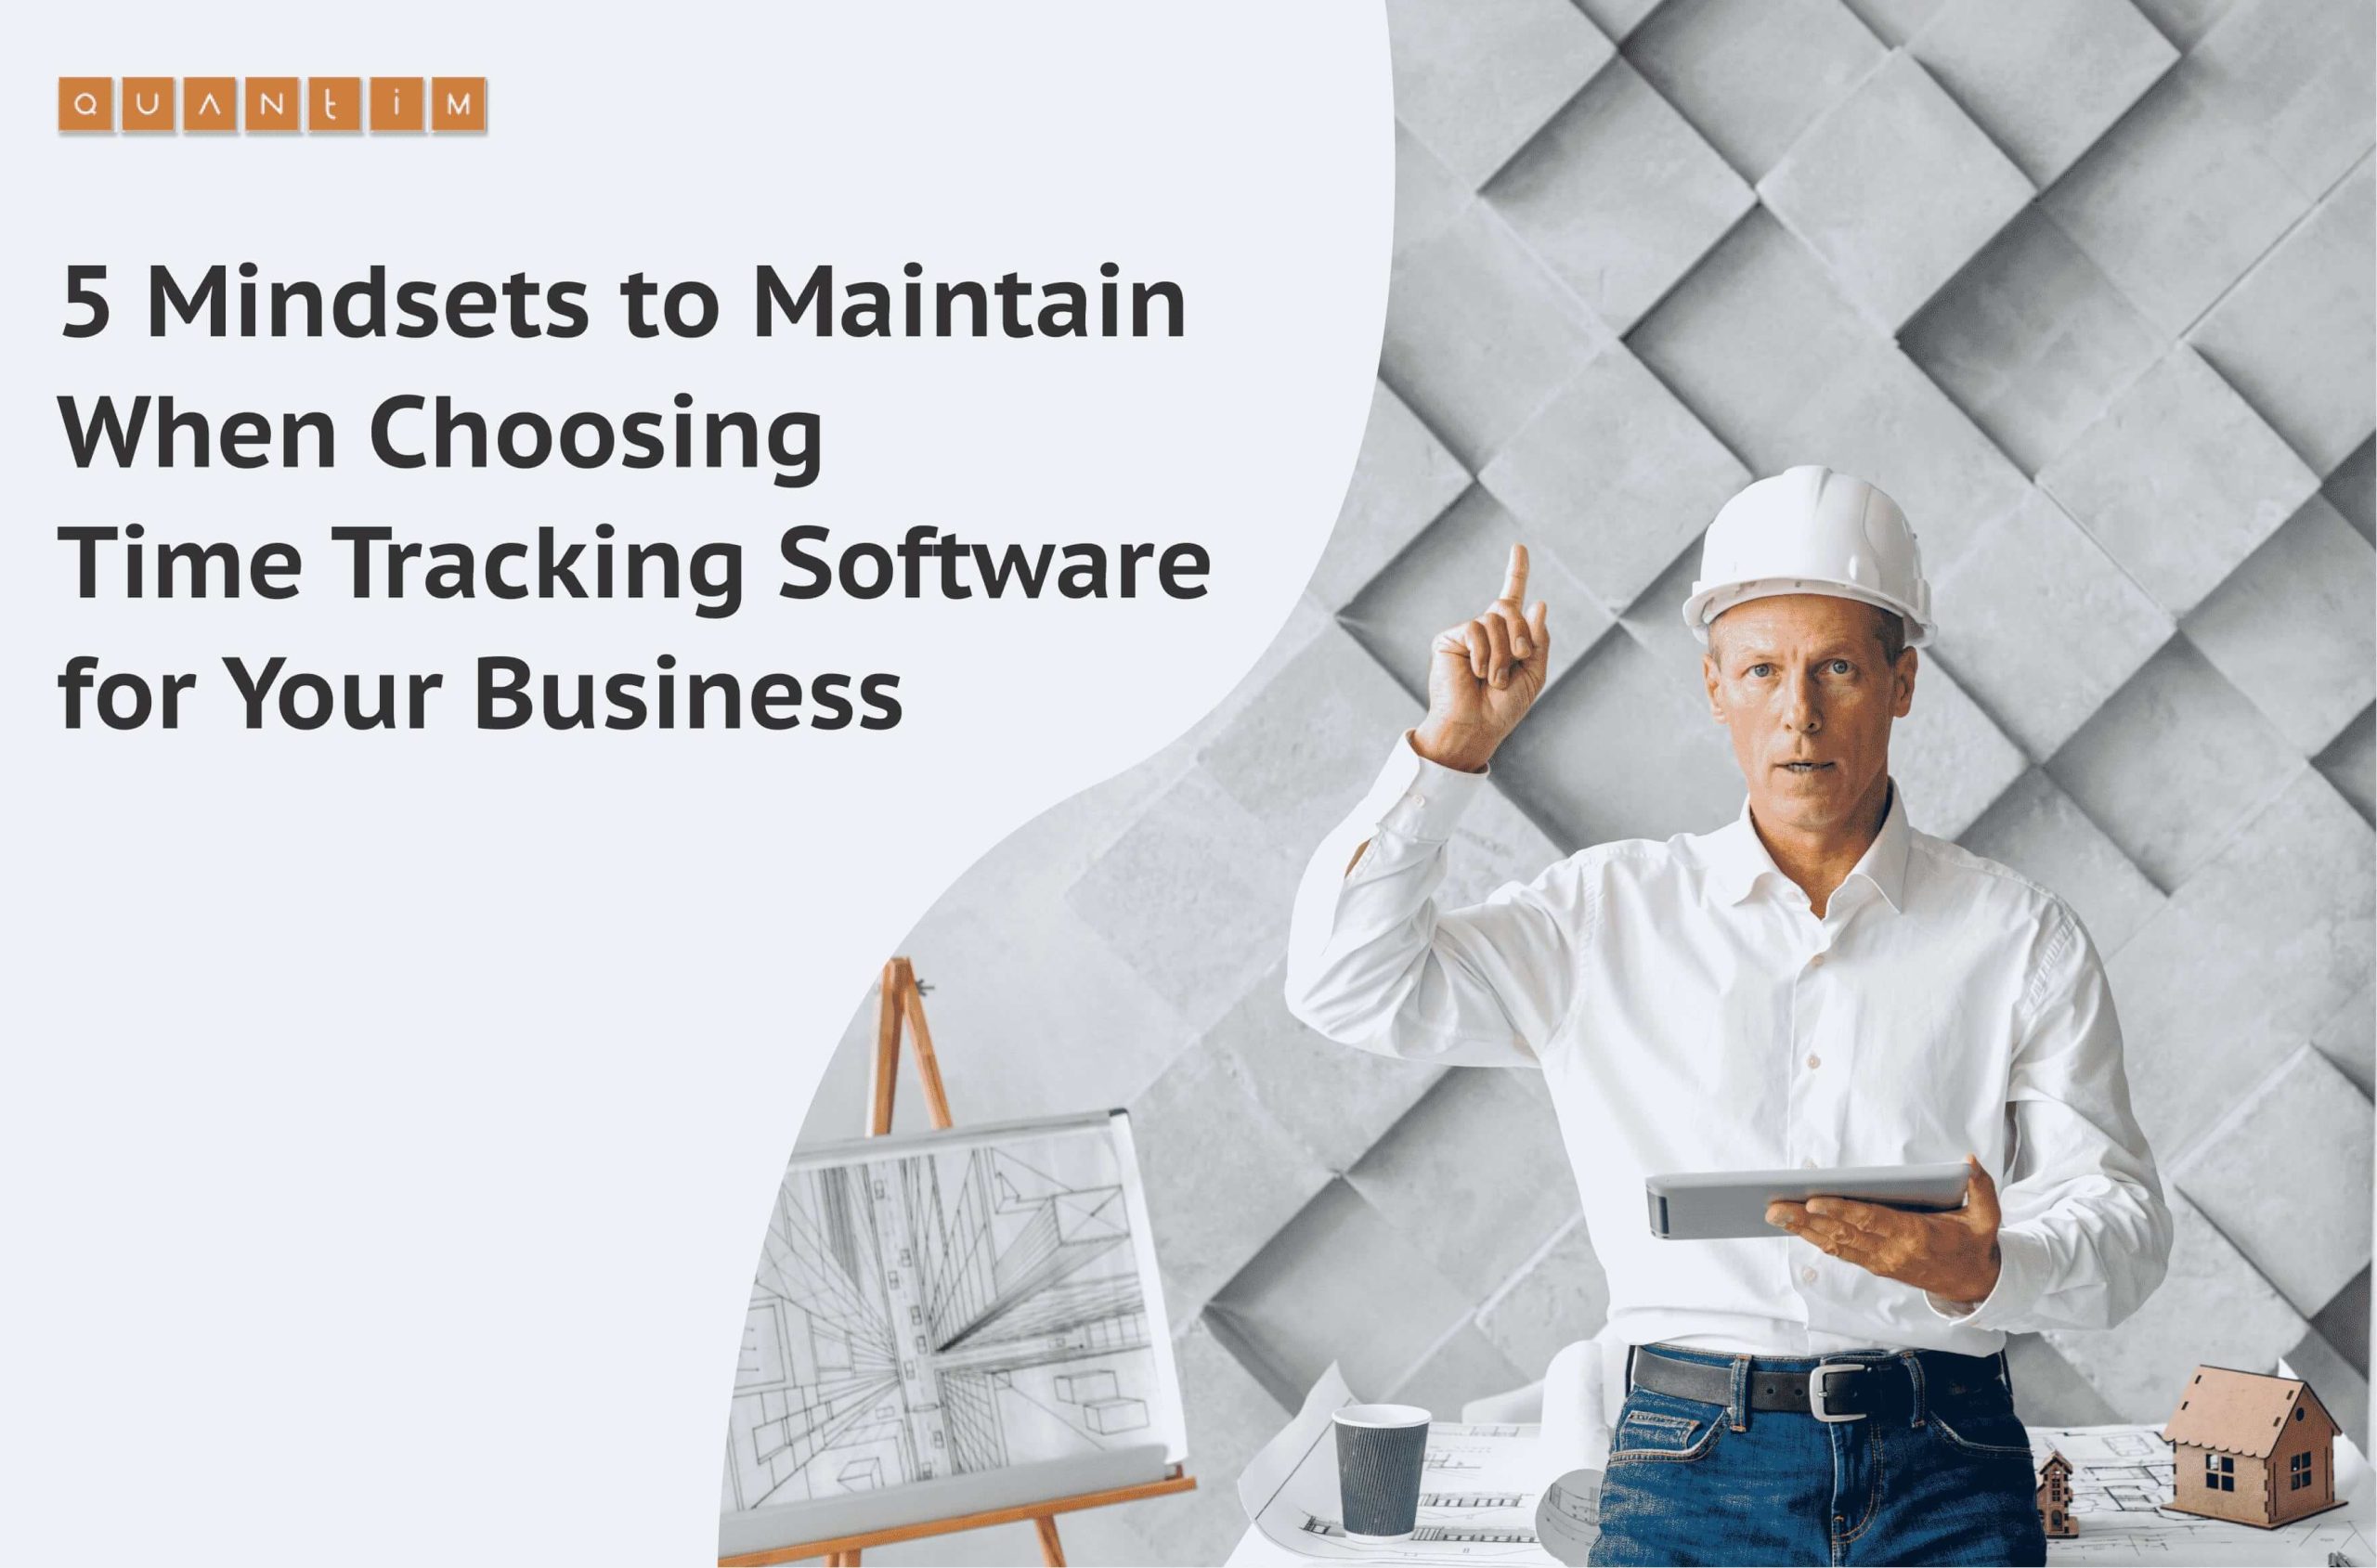 5 Mindsets to Maintain When Choosing Time Tracking Software for Your Business